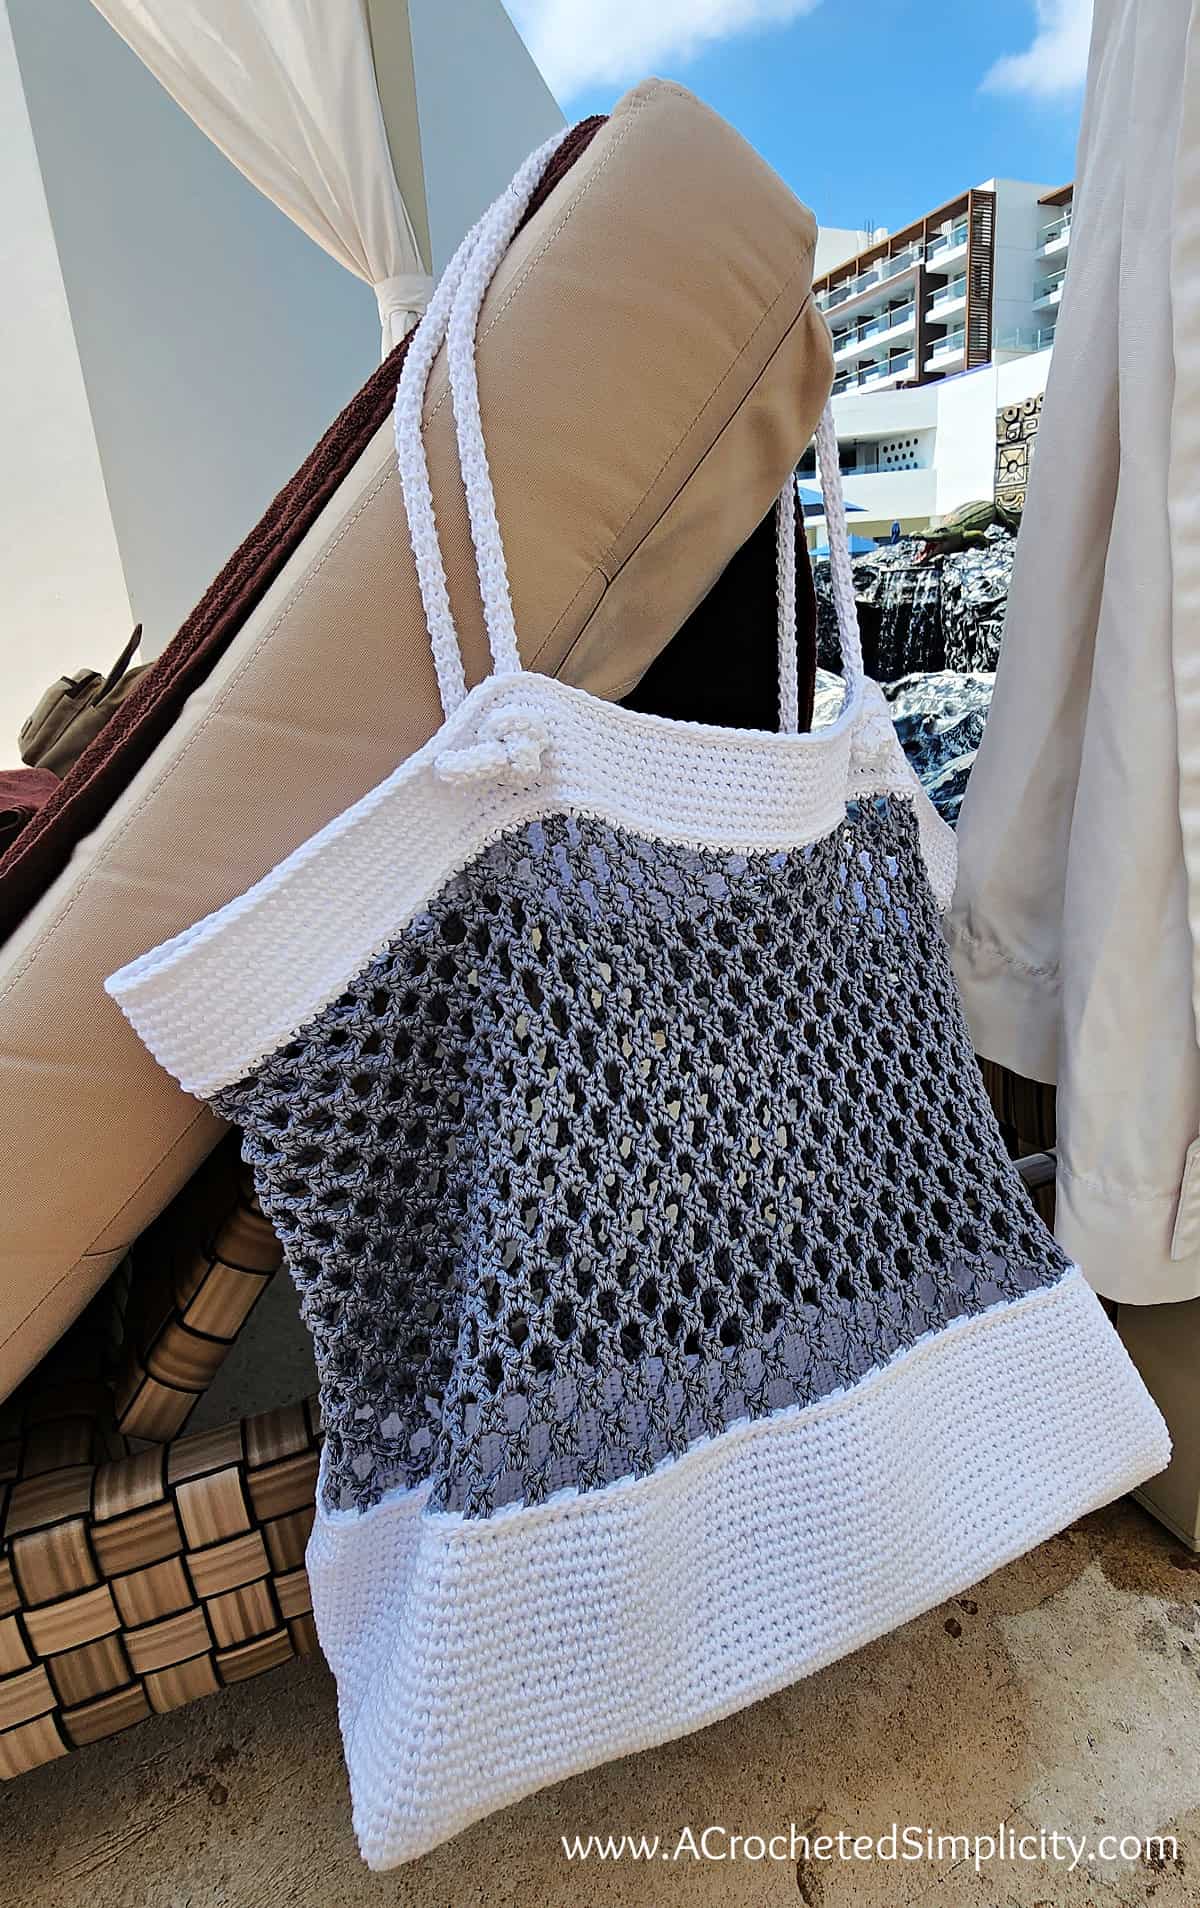 White and grey crochet beach bag hanging on pool lounger.